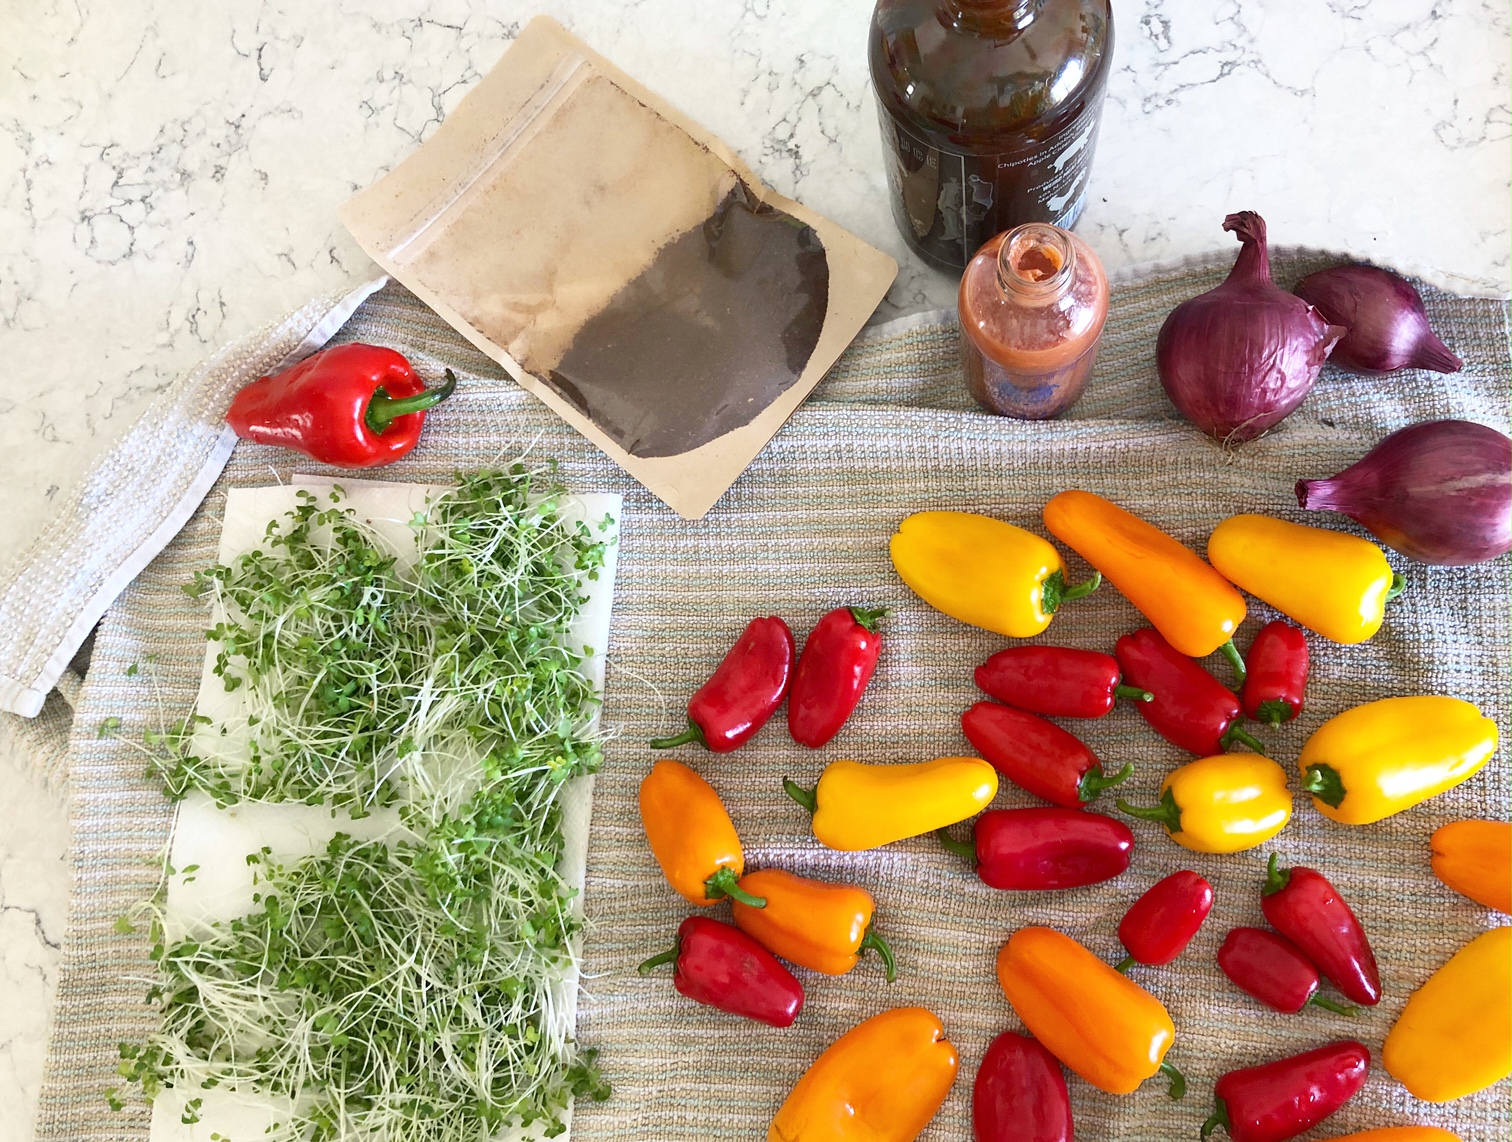 An above shot of the author's market purchases: microgreens on a paper towel, a bright red paprika pepper, a package of paprika seasoning, several small red onions, and a lot of red, orange, and yellow little peppers. Photo by Alyssa Buckley.